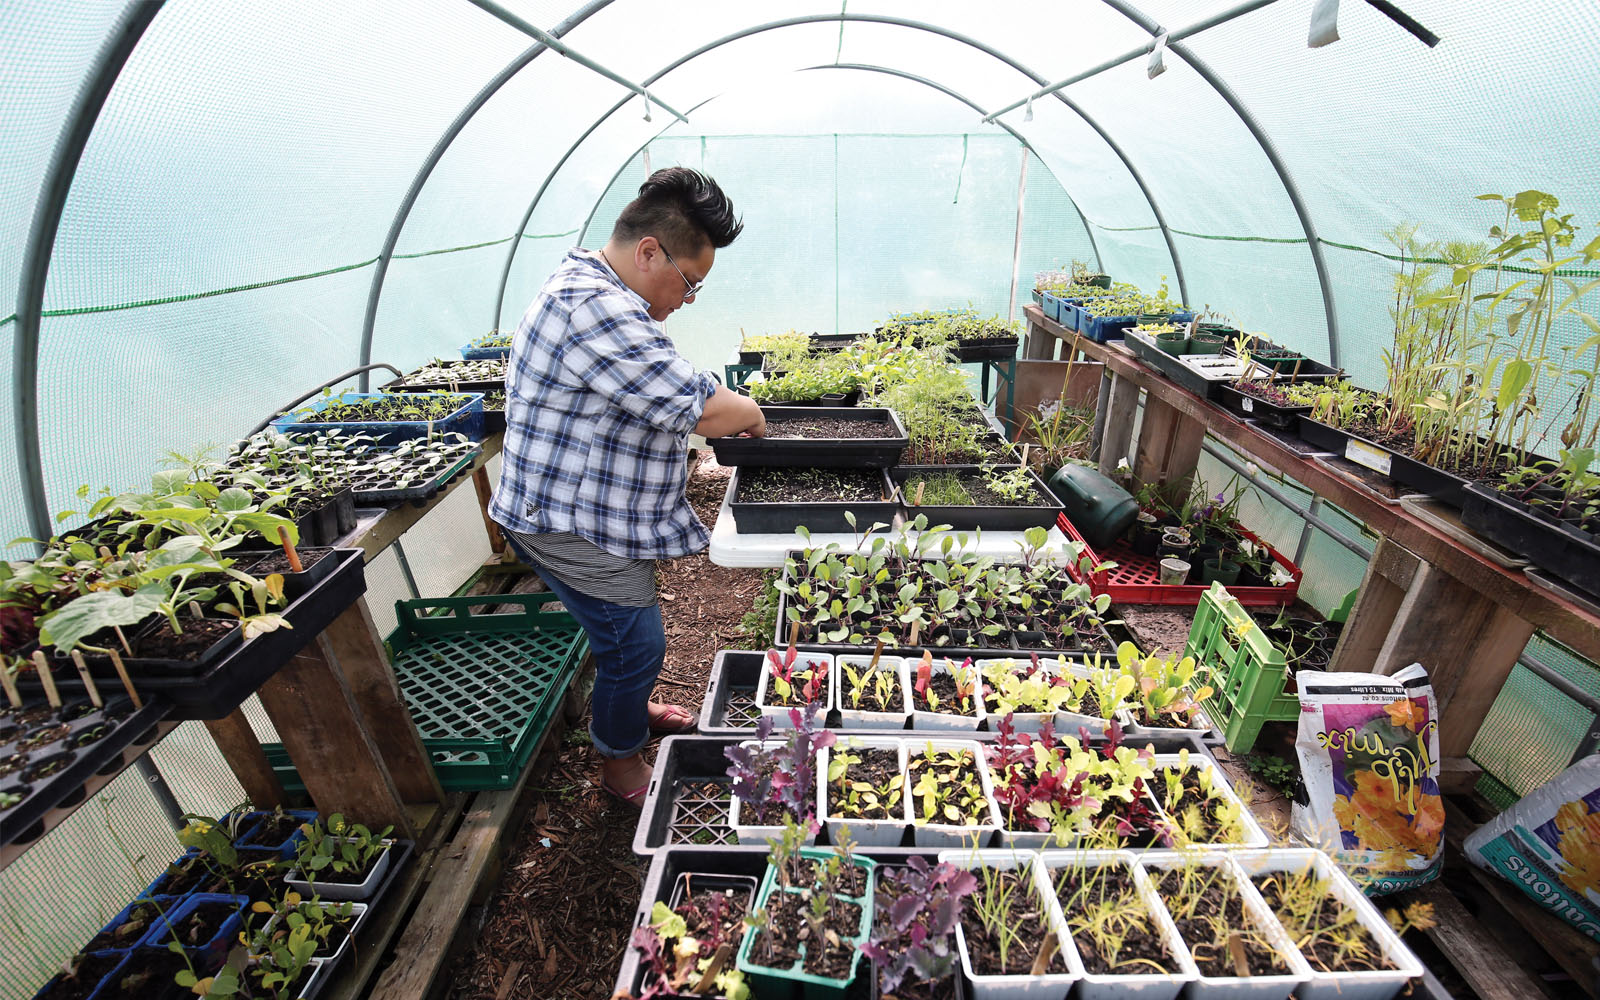 Seedlings grow in the Papatuanuku Kokiri Marae, a communal gathering place in Auckland, New Zealand, where people learn how to reduce waste and grow their own food. Auckland was recognized by C40 for its commitment to reducing landfill waste.